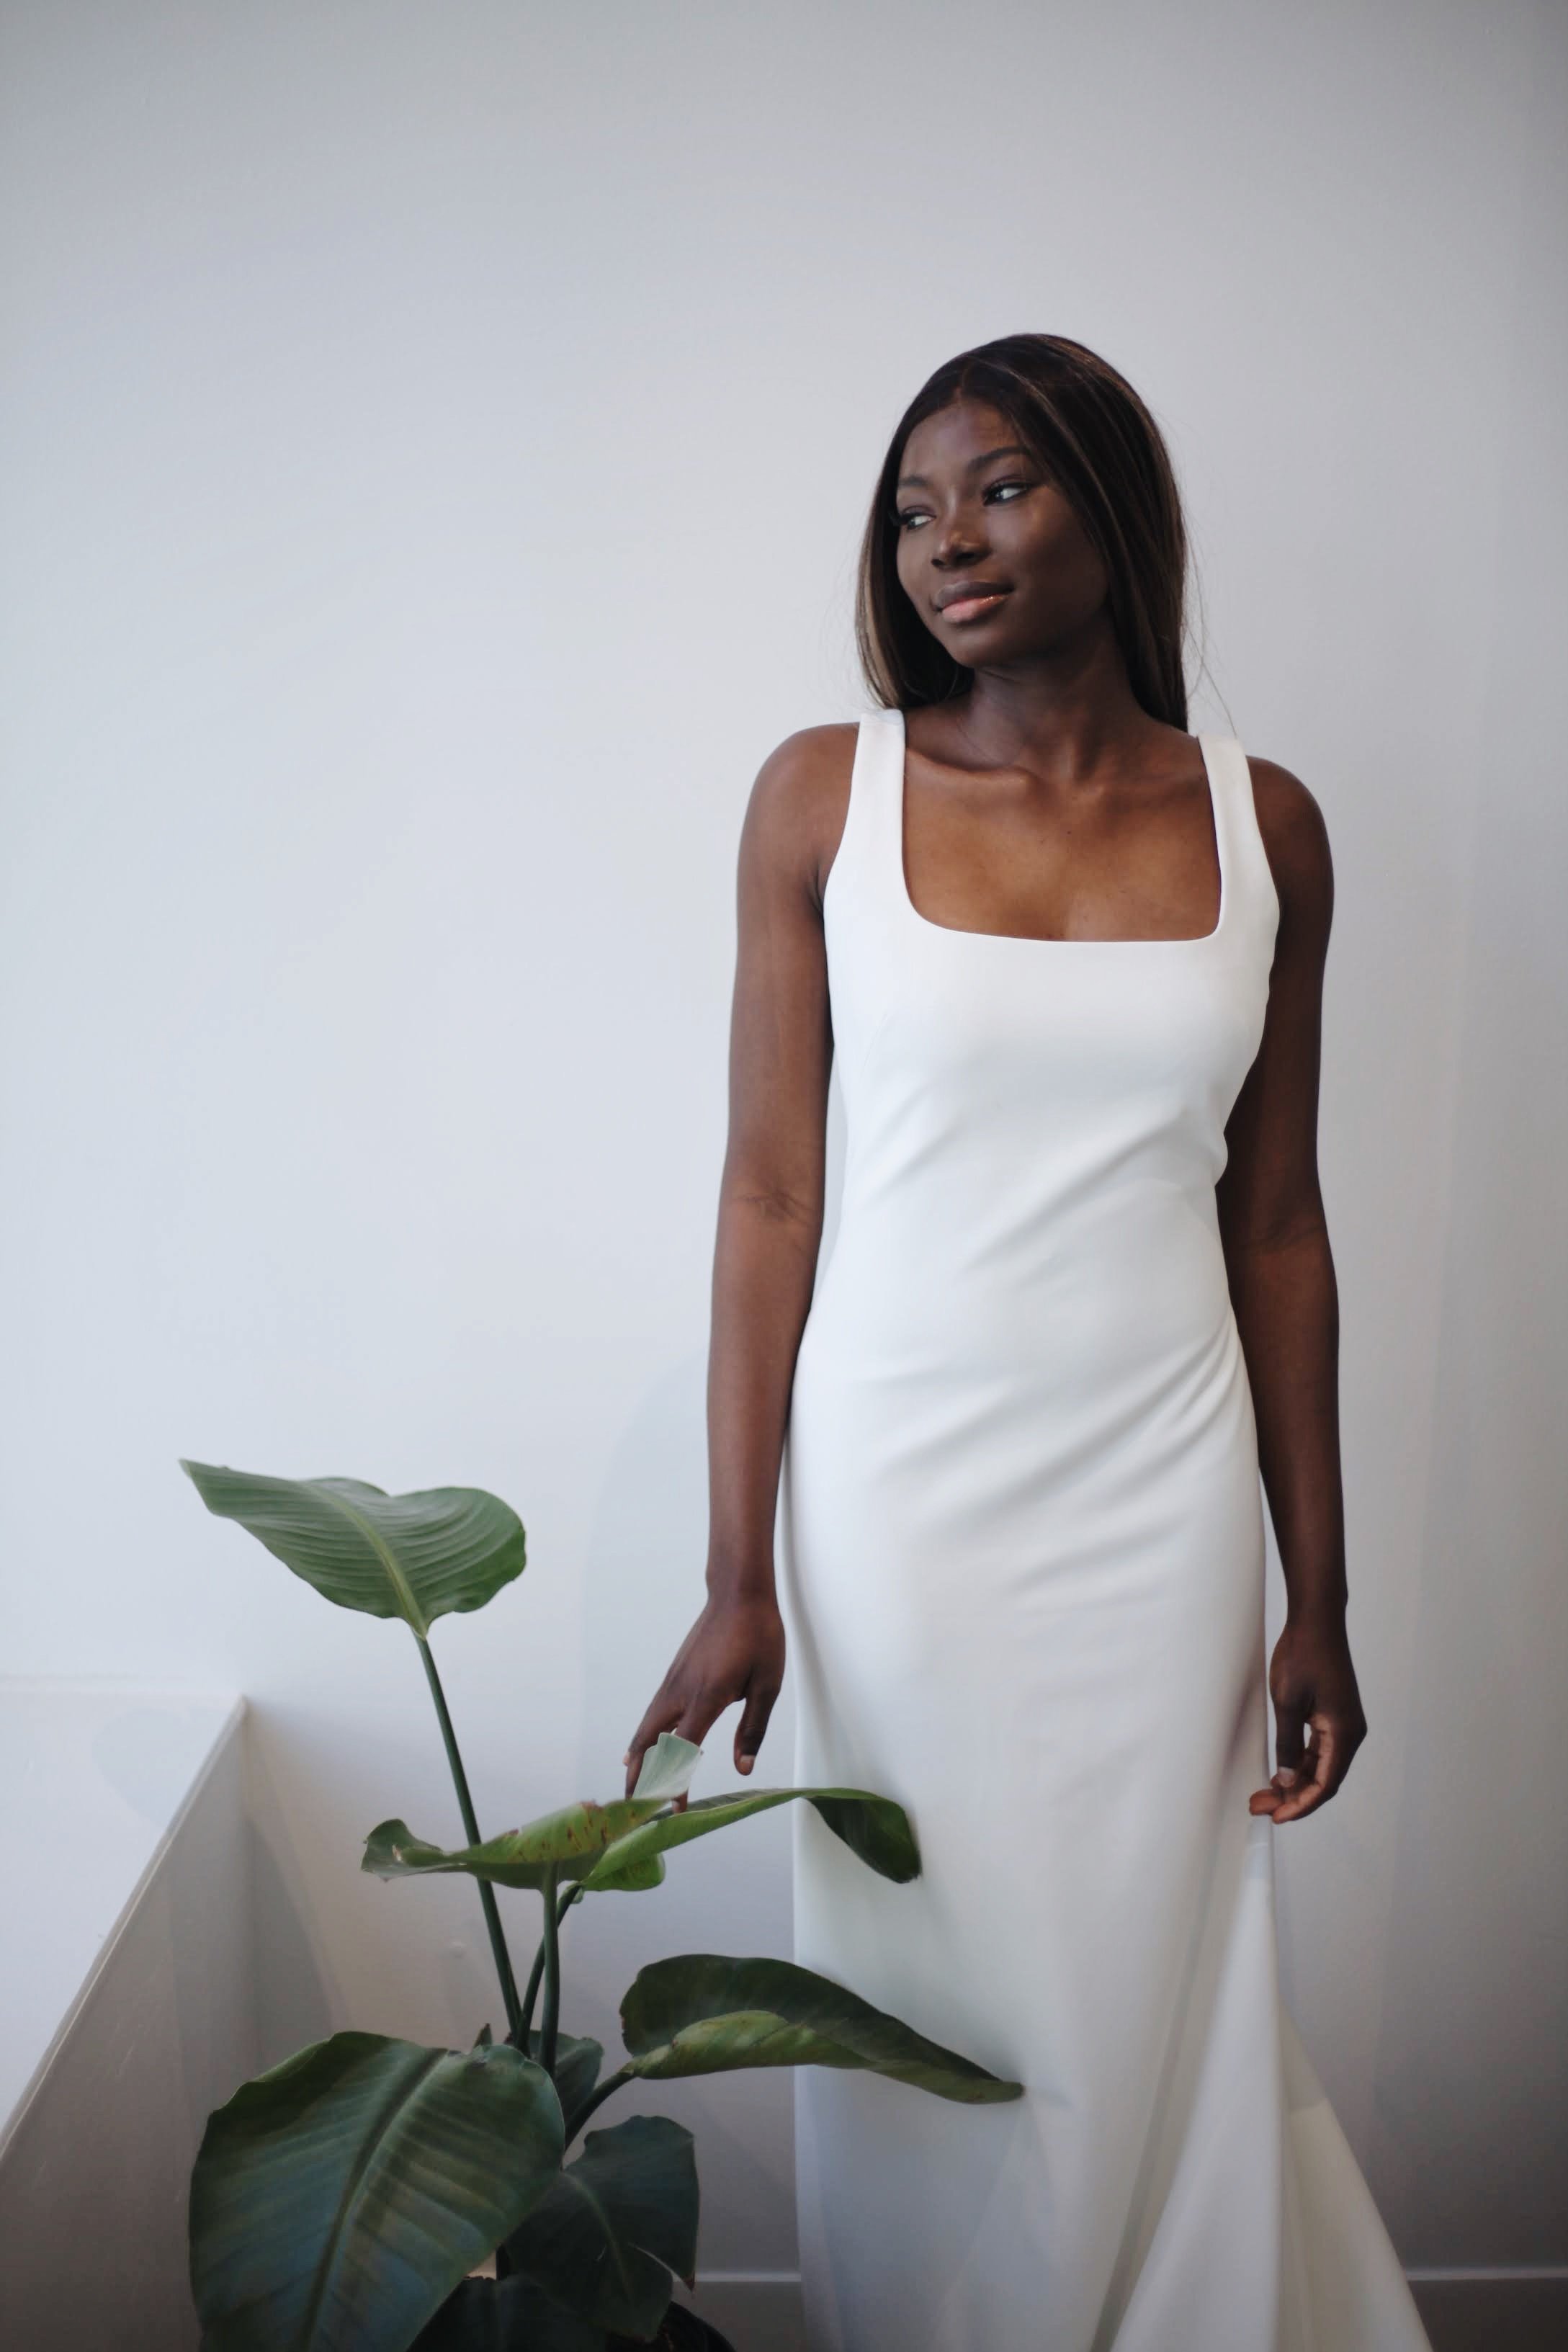 the label by aandbe and annabe bridal shops just dropped a new wedding dress design, scout.